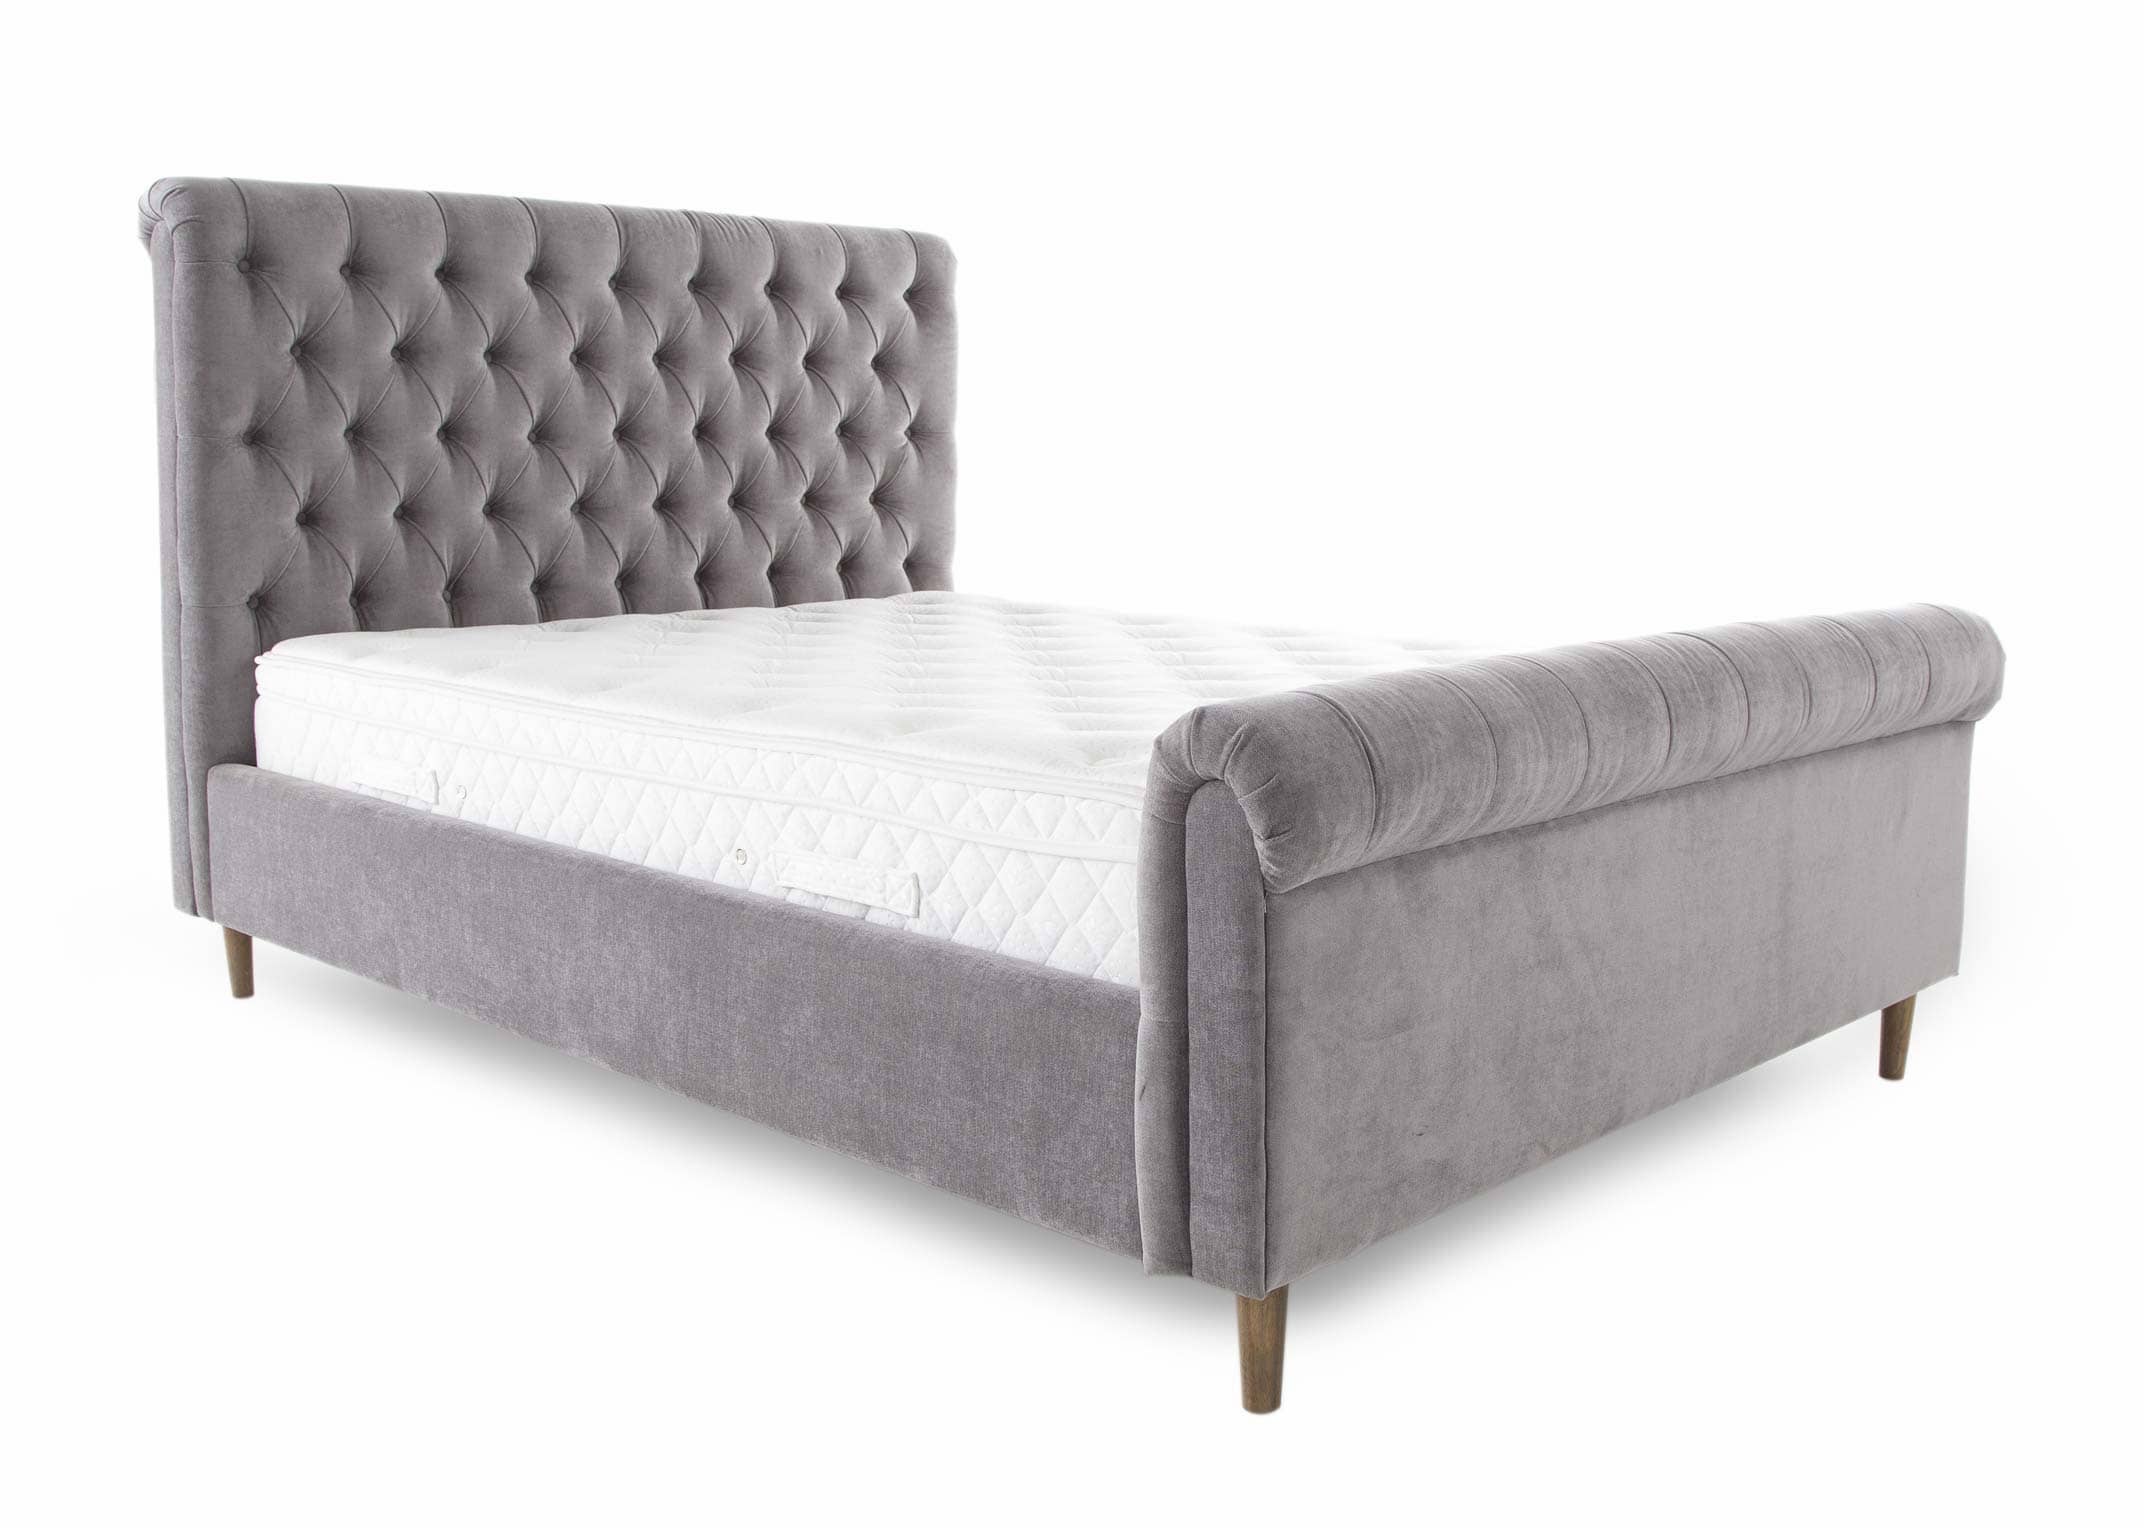 5ft Grey Fabric Bed Frame Sofia, King Grey Bed Frame